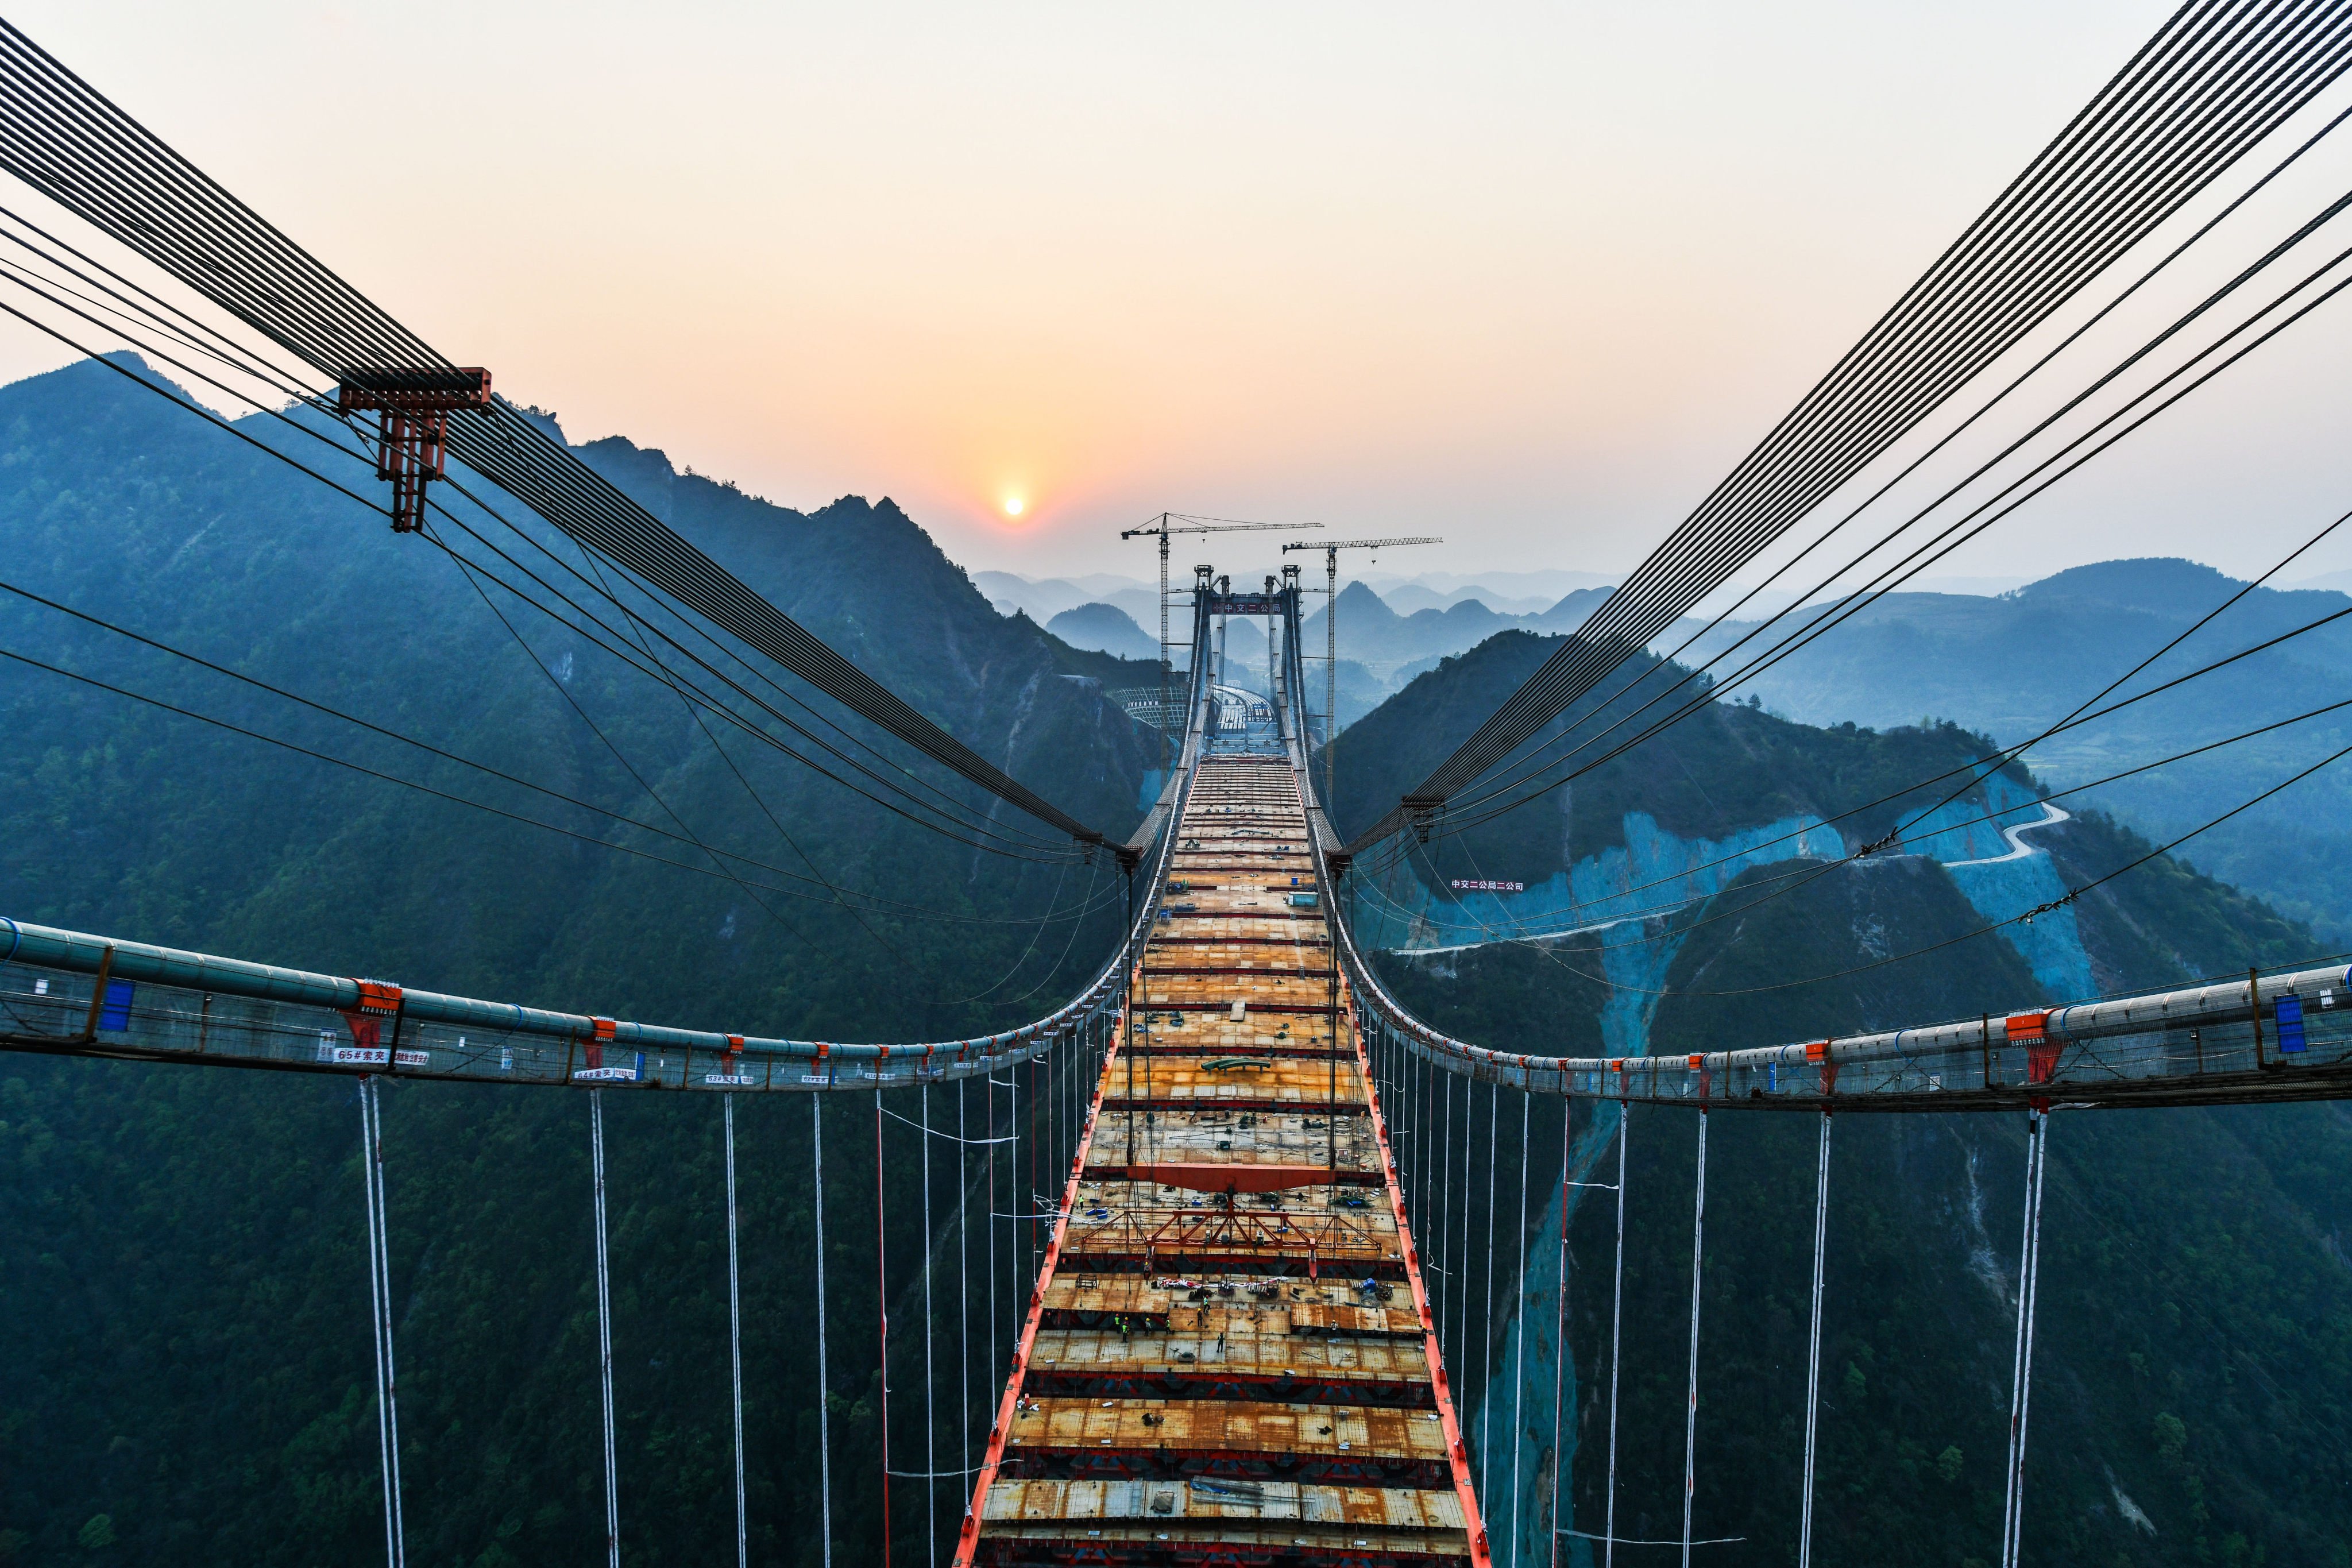 The Yangbaoshan grand bridge of the Guiyang-Huangping Highway at sunset, under construction on March 17, 2021 in Guizhou province. Guizhou has become known as a “bridge museum” of the world, with more than 28,000 highway bridges and almost half of the world’s tallest 100 bridges. Photo: Xinhua